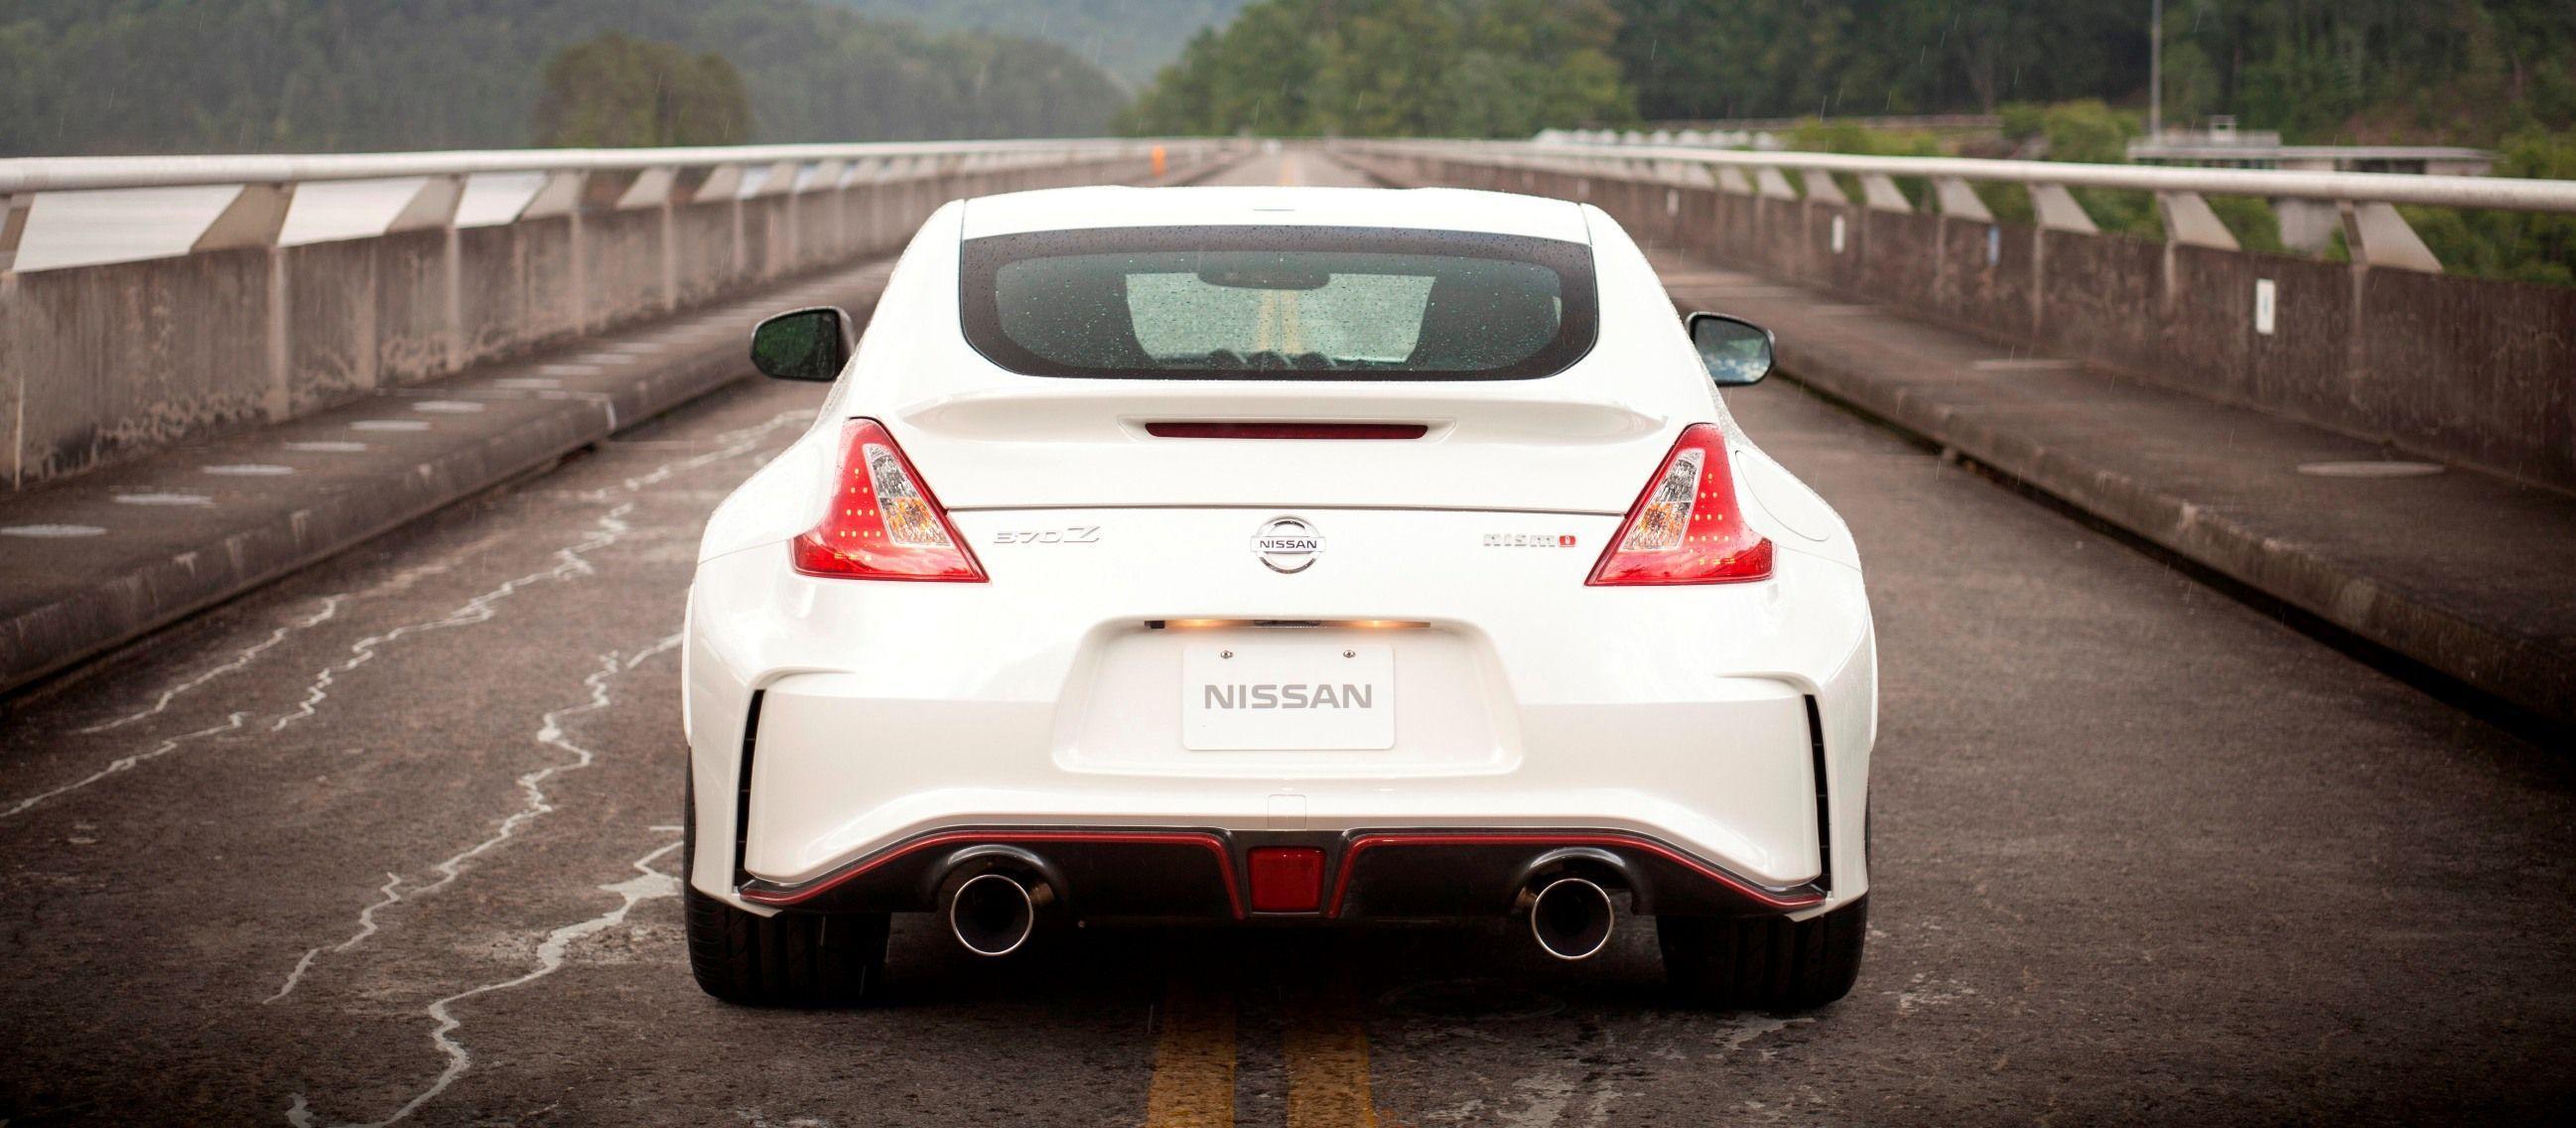 image For > 2015 Nissan 370z Nismo